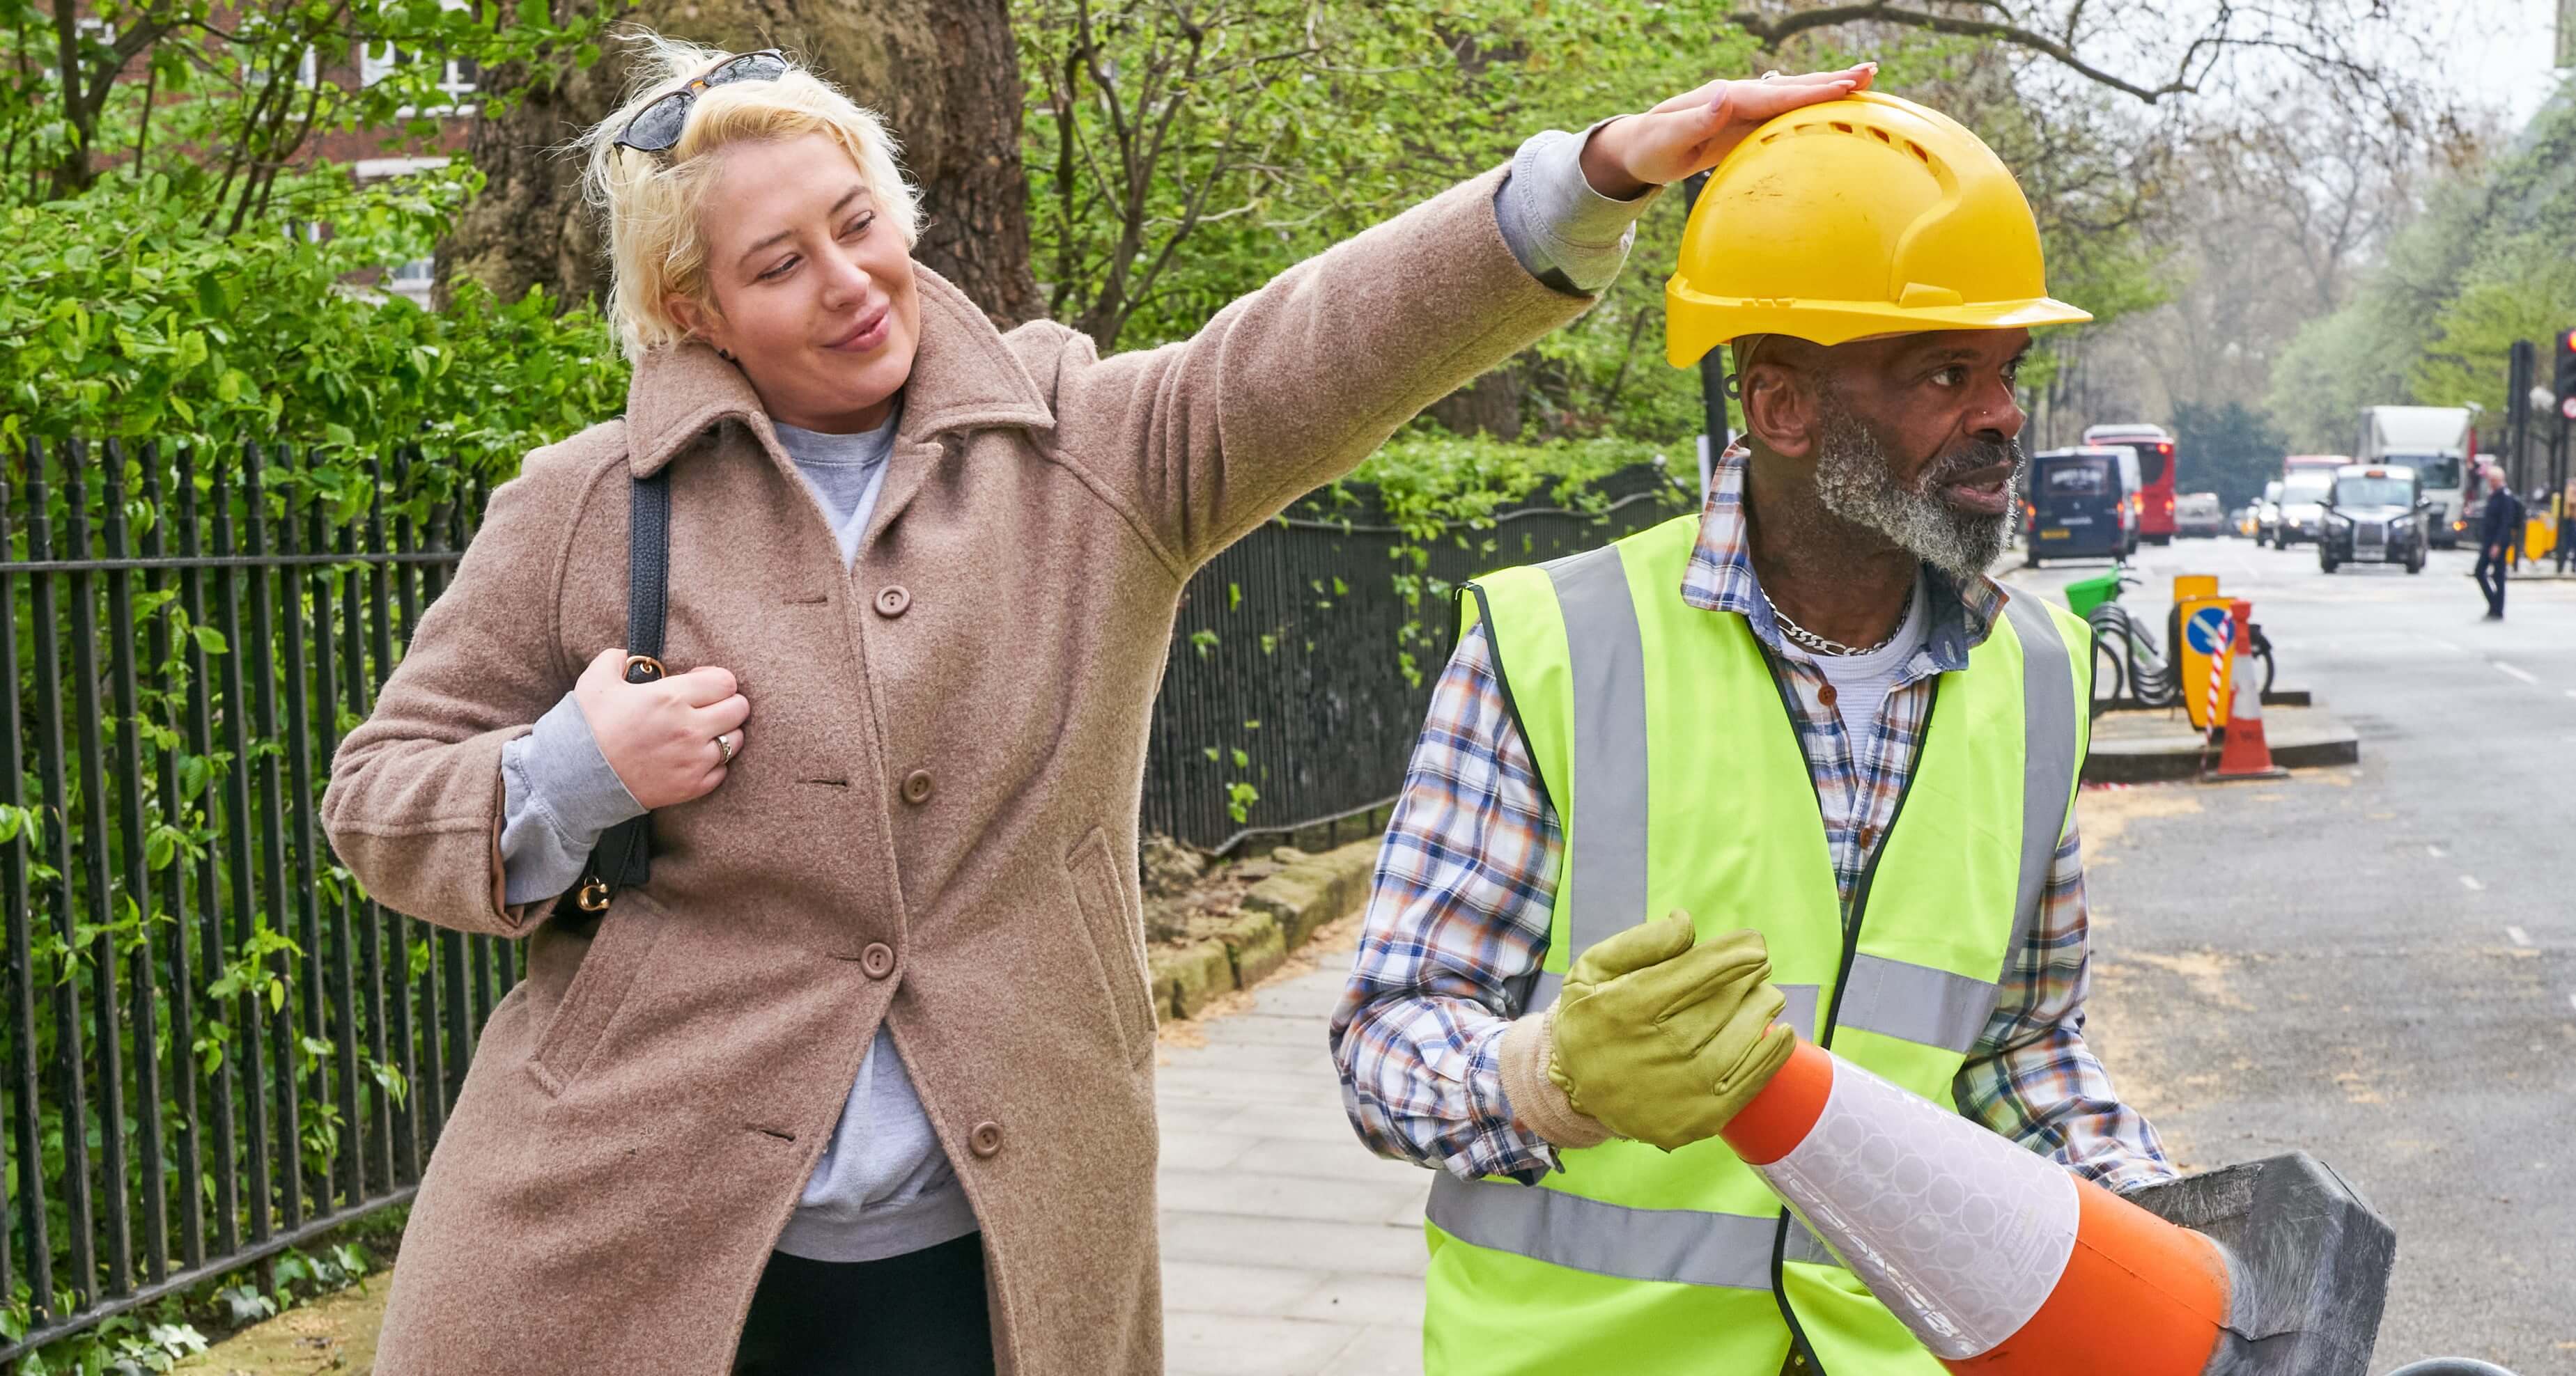 A London street. A woman in a beige coat reaches out and pats the head of construction worker, who is wearing a hard hat and high-vis vest and is laying traffic cones out in the road.